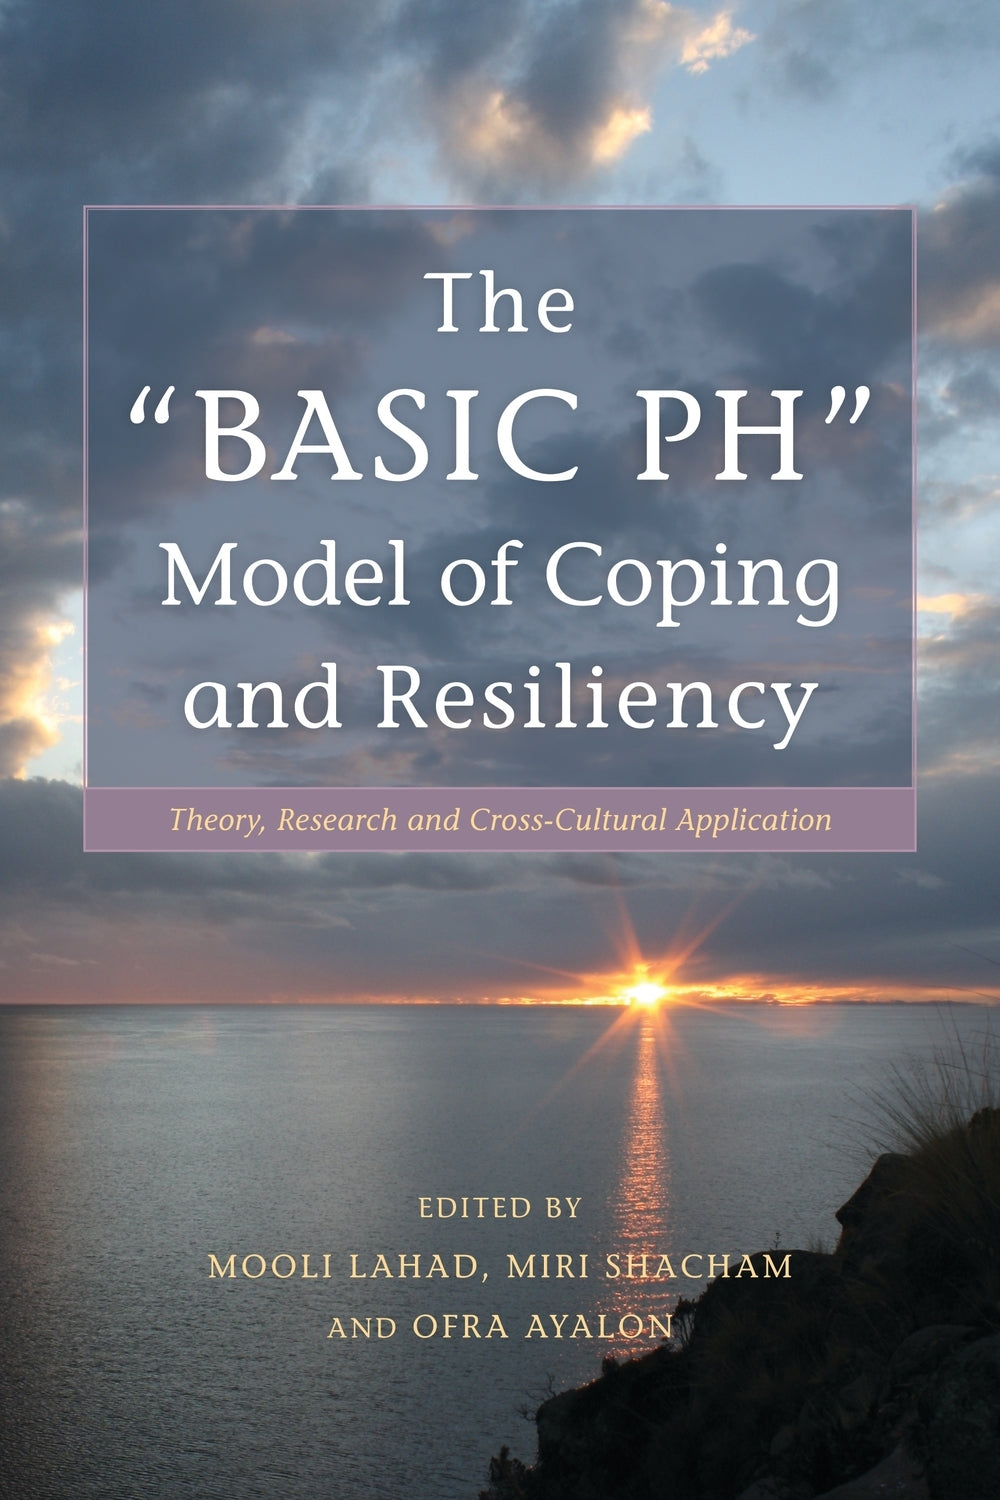 The "BASIC Ph" Model of Coping and Resiliency by Professor Mooli Lahad, Ofra Ayalon, Miri Shacham, No Author Listed